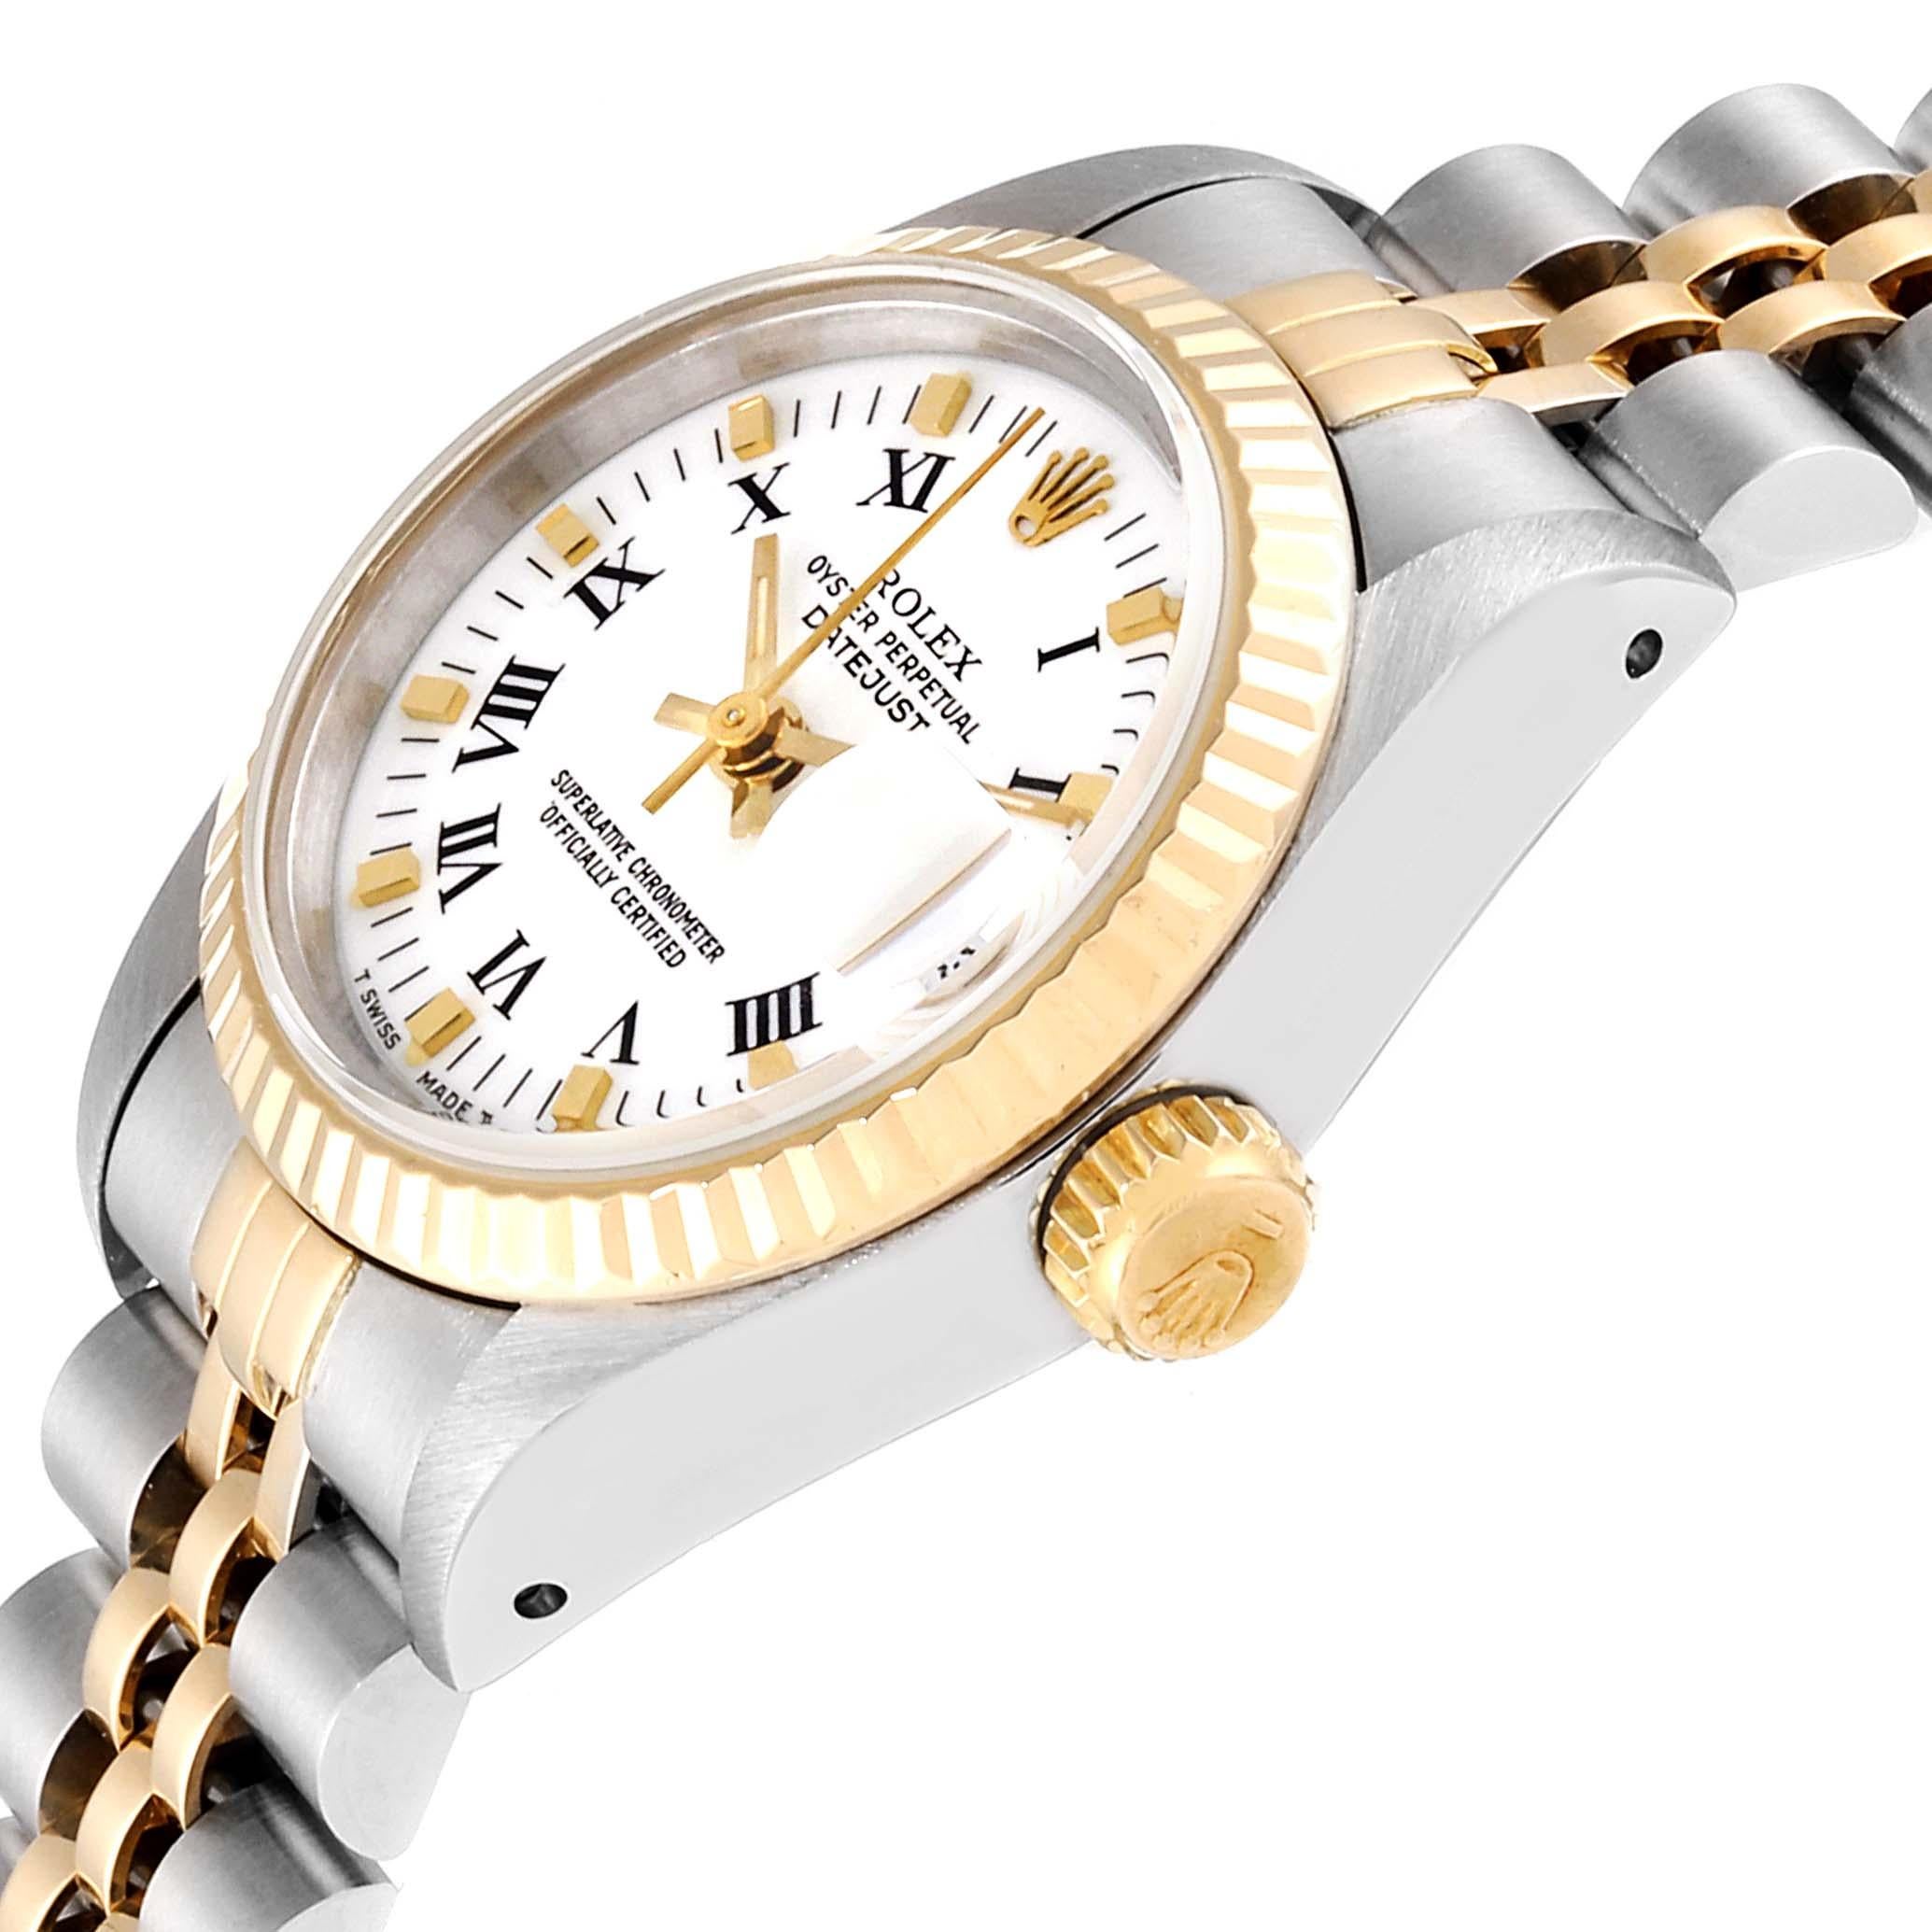 Rolex Datejust Steel Yellow Gold White Dial Ladies Watch 69173 For Sale 1